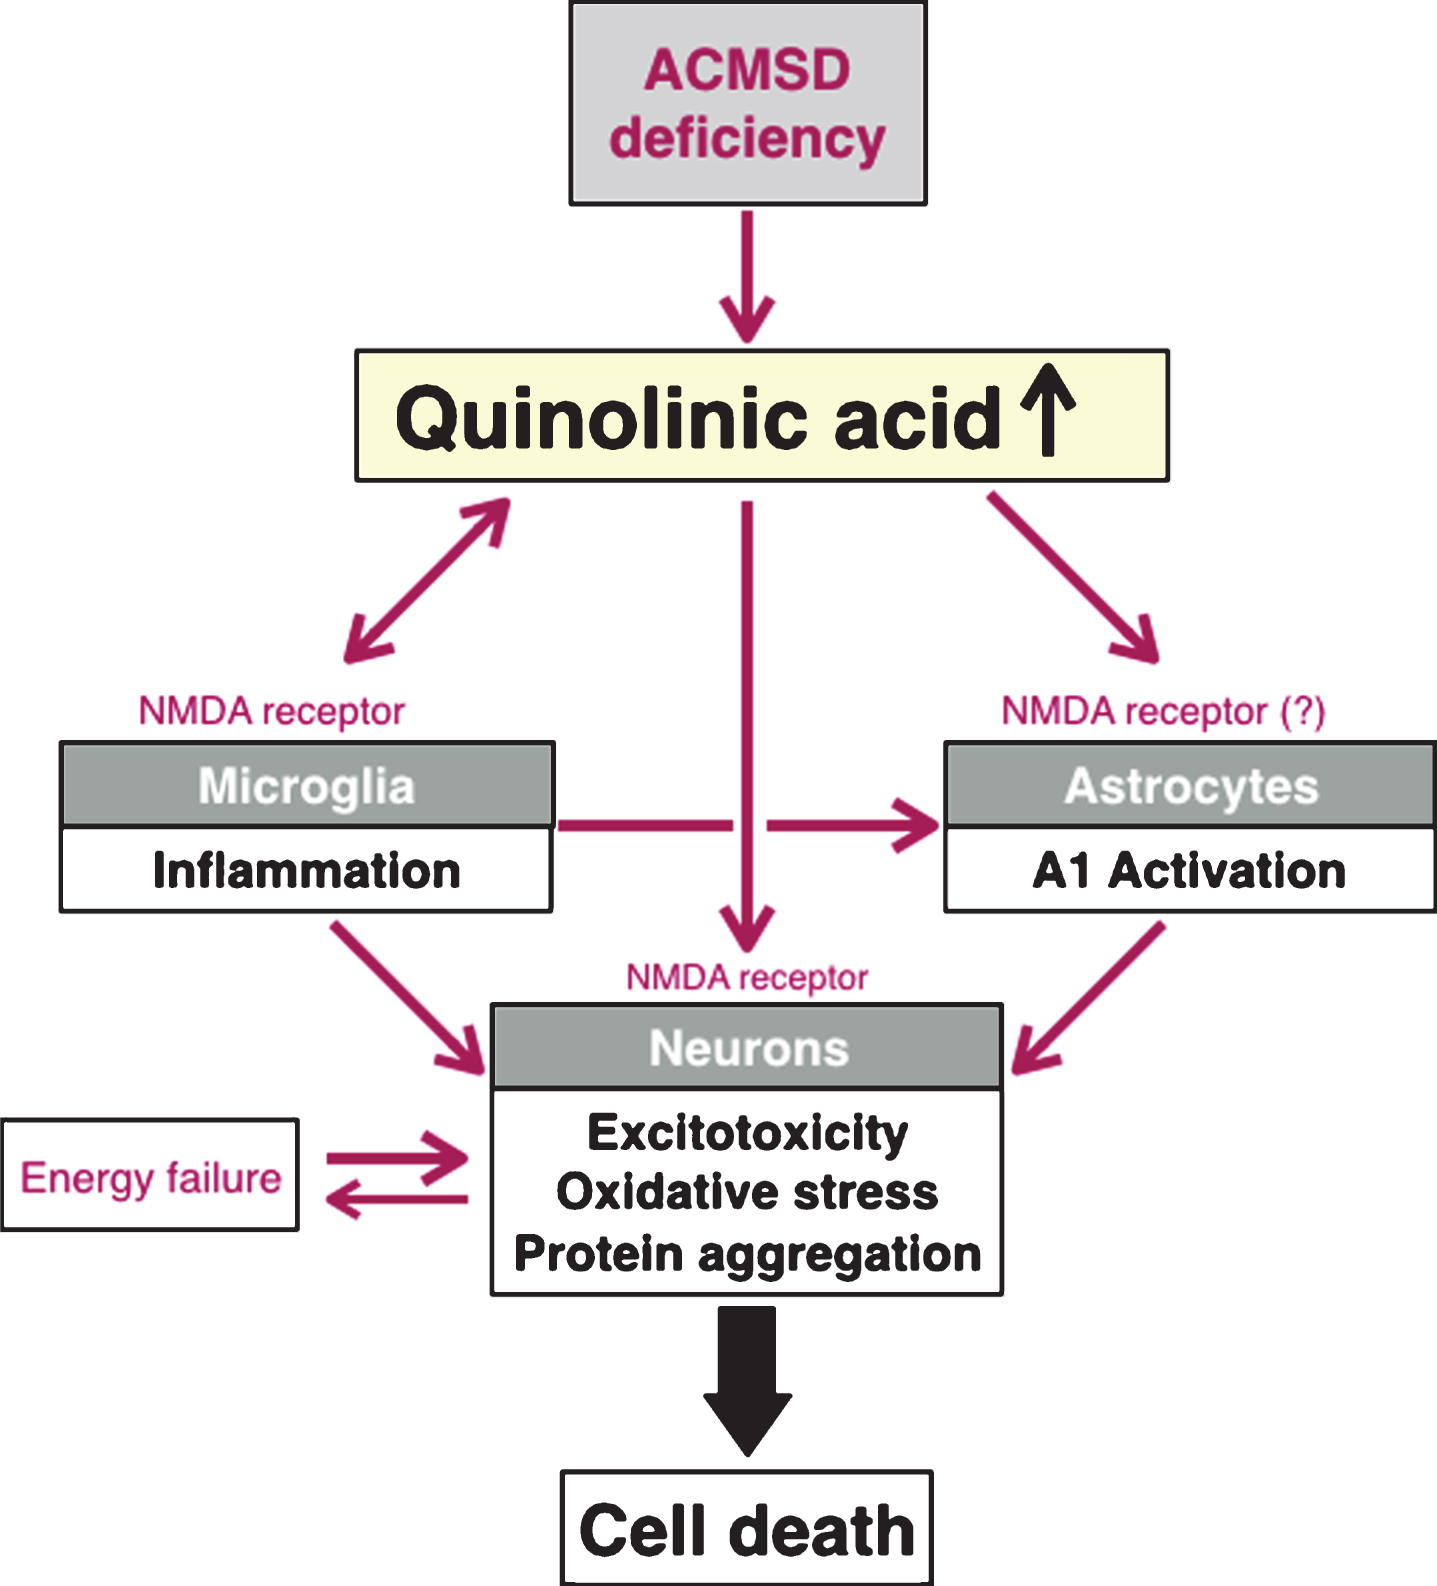 Schematic diagram describing a model for possible interactions between quinolinic acid and different cell types in the brain, when it comes to pathogenetic mechanisms that are highly relevant to Parkinson’s disease. In this model, we propose that a relative lack of ACMSD increases the levels of quinolinic acid and consequently elevates the risk for excitotoxicity and neuroinflammation. Maroon arrows depict an increase activity of a molecular pathway, and the green T-bar illustrates inhibition.